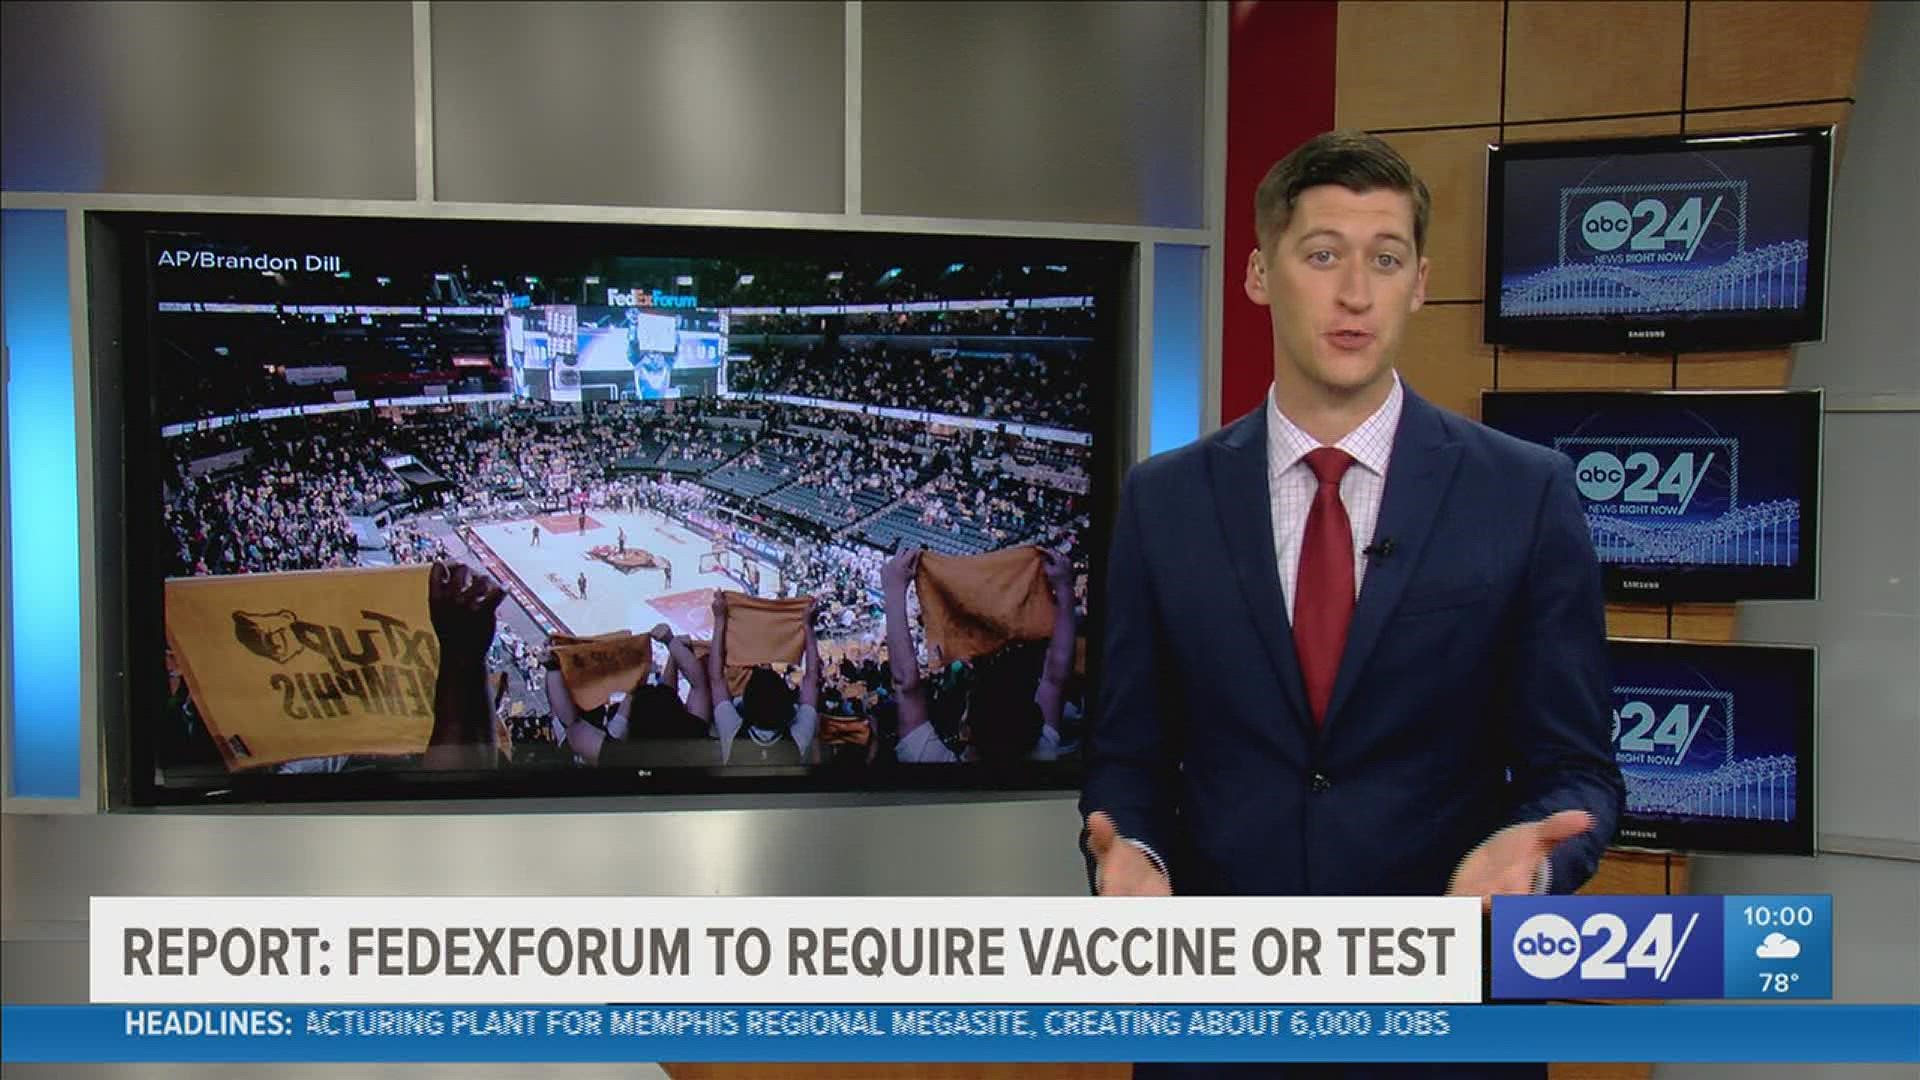 It was announced Tuesday that the FedEx Forum will require proof vaccination or negative test to attend an event.